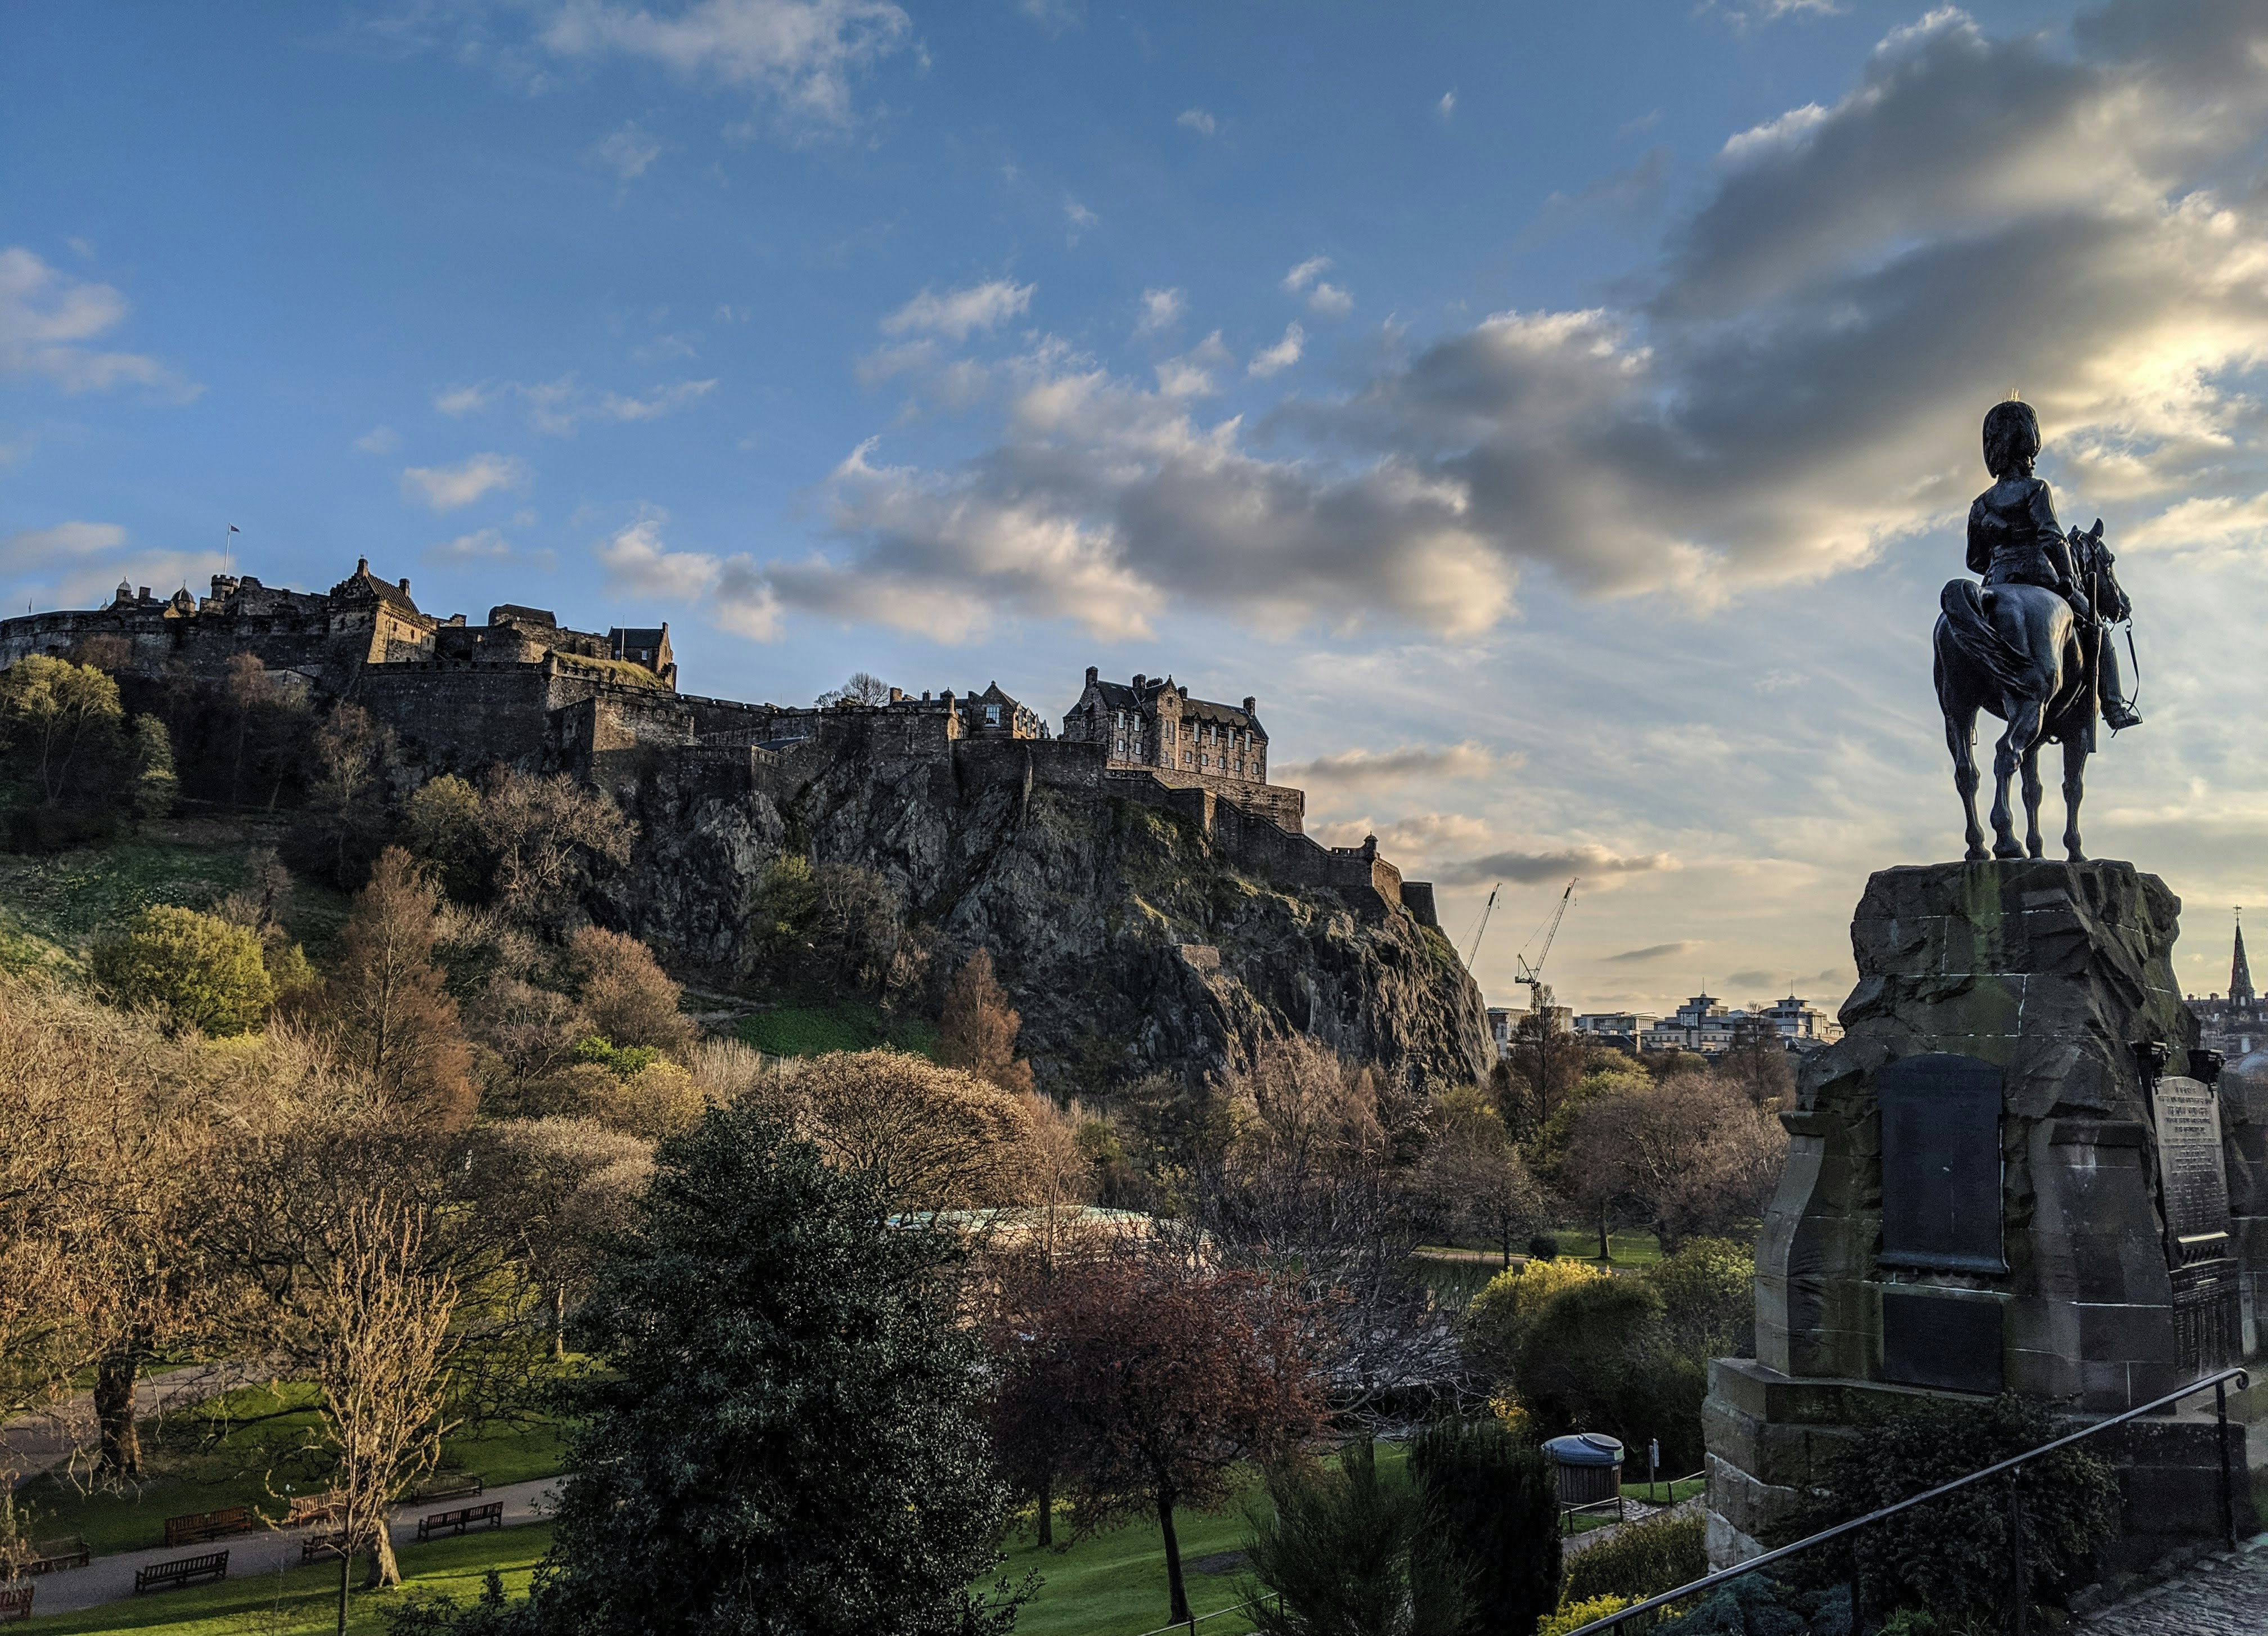 A wide view of Edinburgh with the castle in the background and a statue of a man on horseback in the foreground